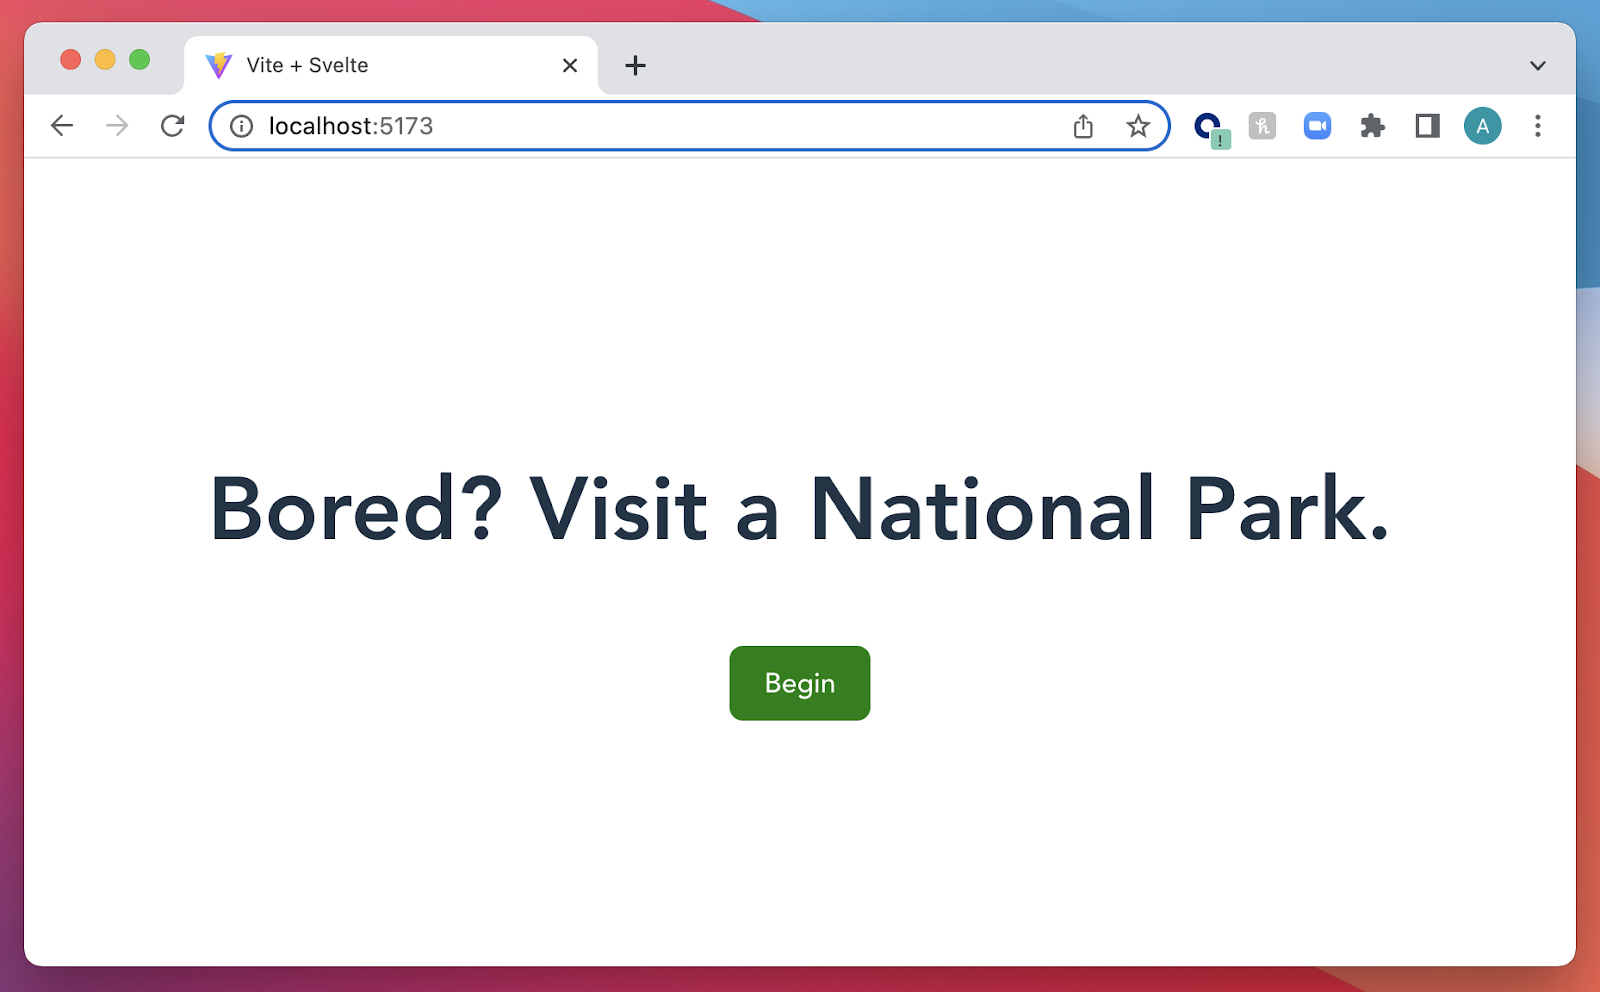 App welcome screen that says "bored? visit a national park."